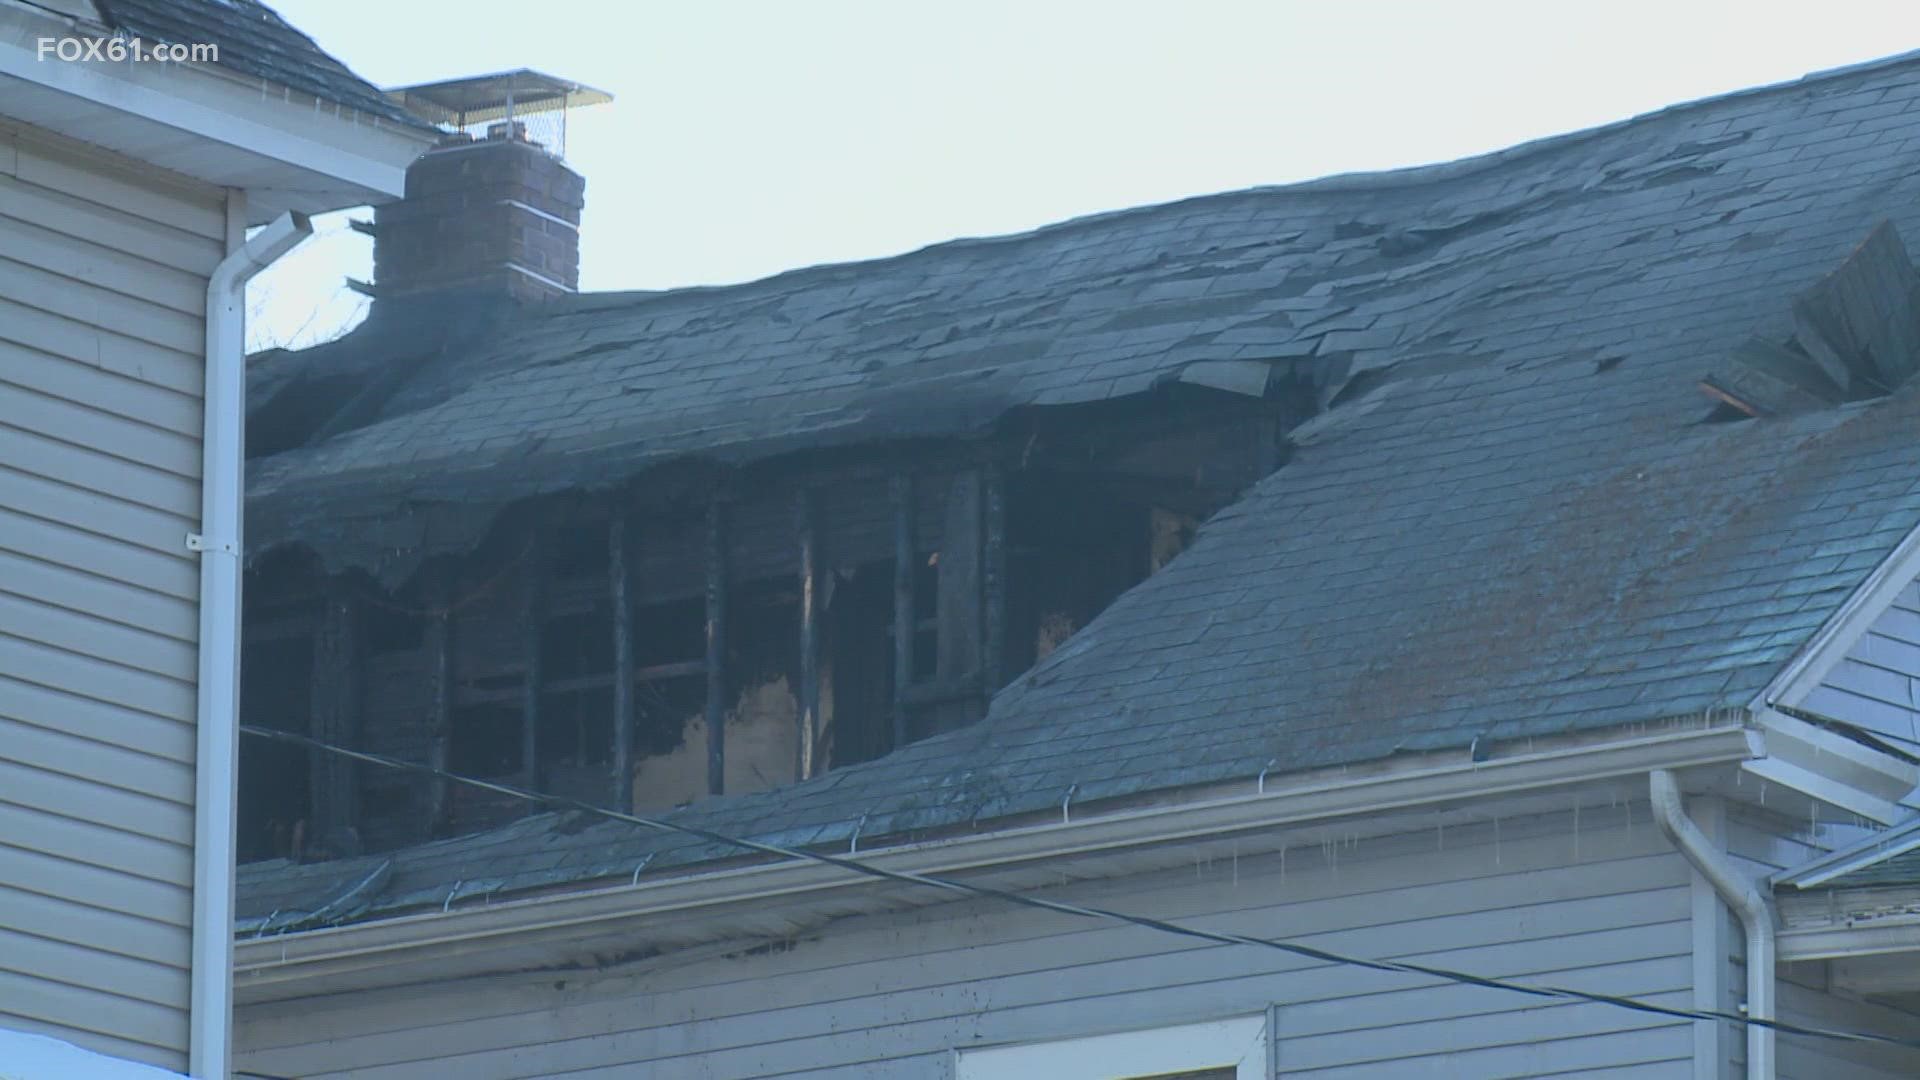 Firefighters believe the fire started on the first floor and worked its way up.